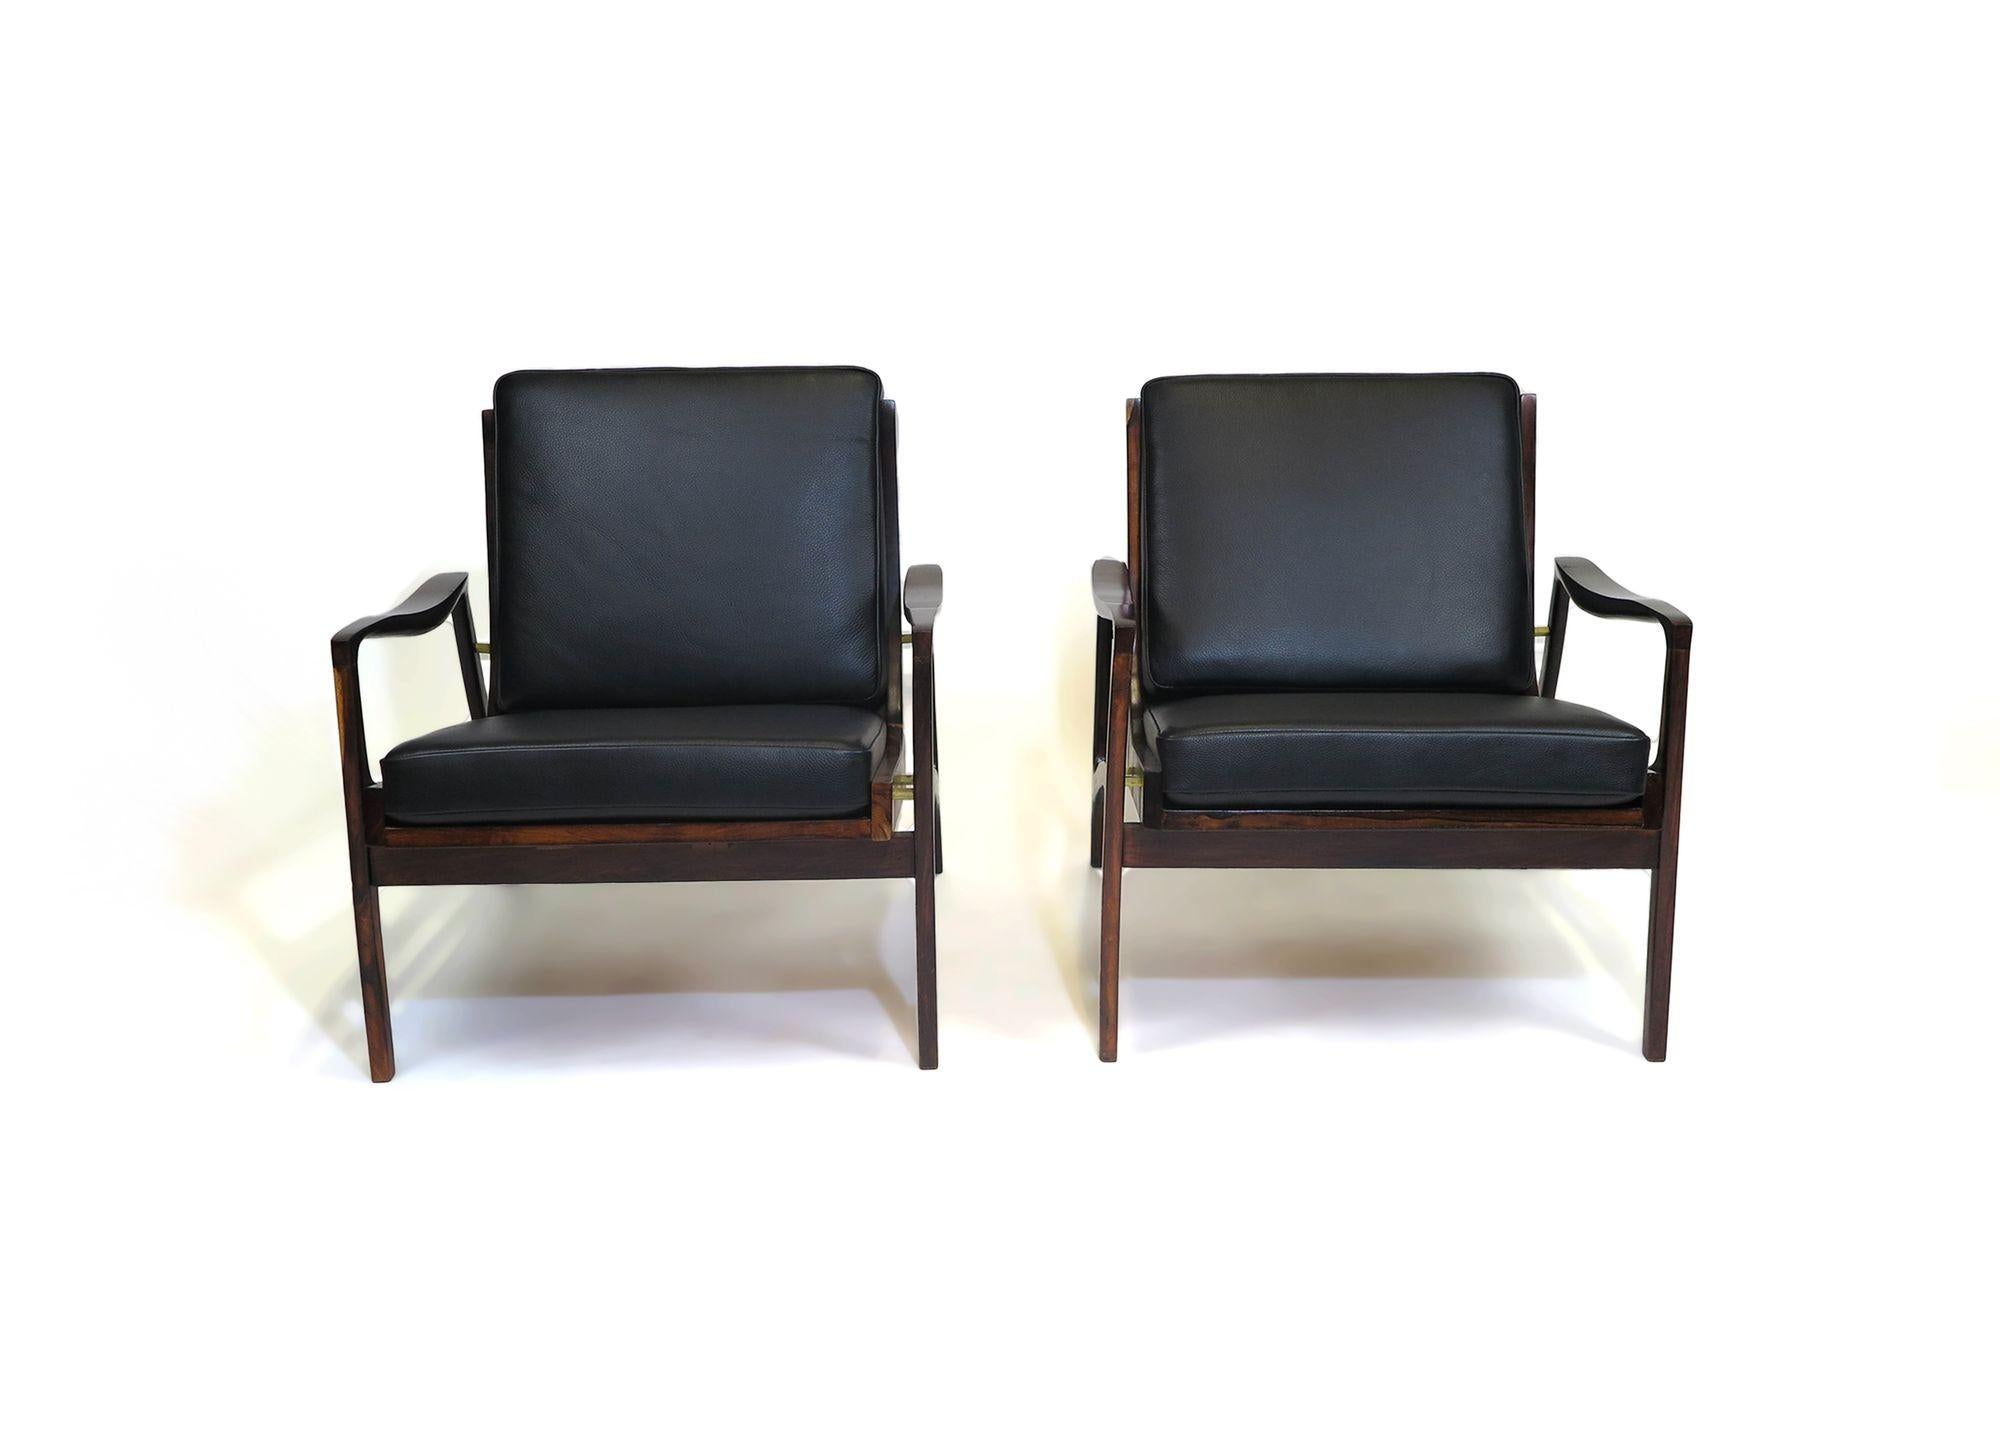 Liceu de Artes e Officios lounge chairs handcrafted from solid Jacaranda in a sculptural form with sloping arms and tapered edges. Newly upholstered in a full-aniline black leather. 
Measurements 
W 29.5'' x D 26'' x H 34.5''
Seat Height 16.5''.